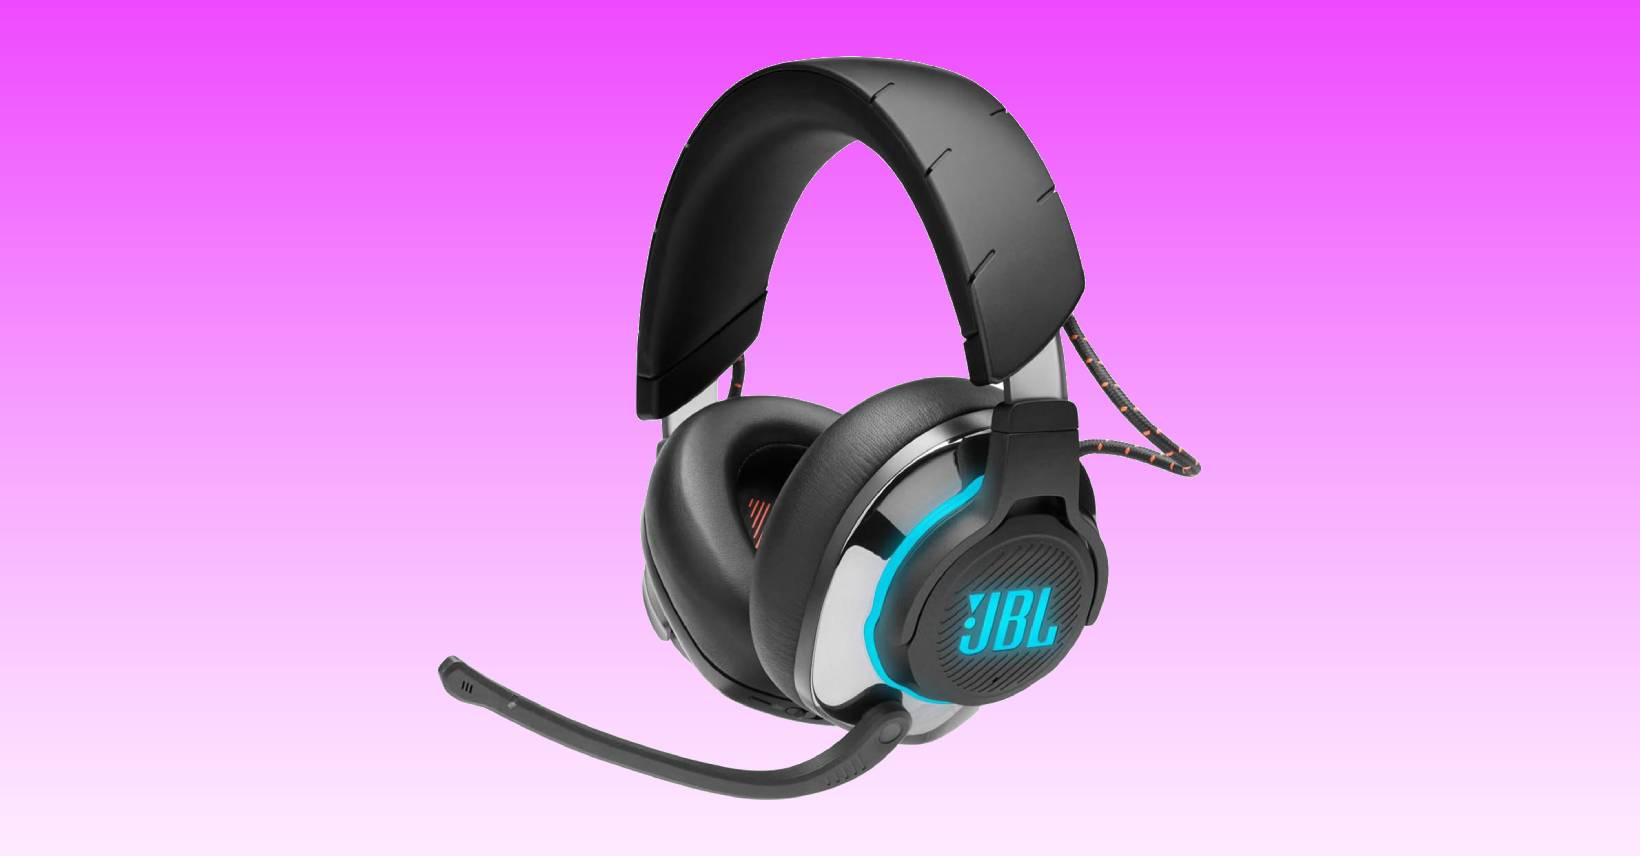 Get immersed with this JBL Quantum 810 wireless gaming headset Amazon deal